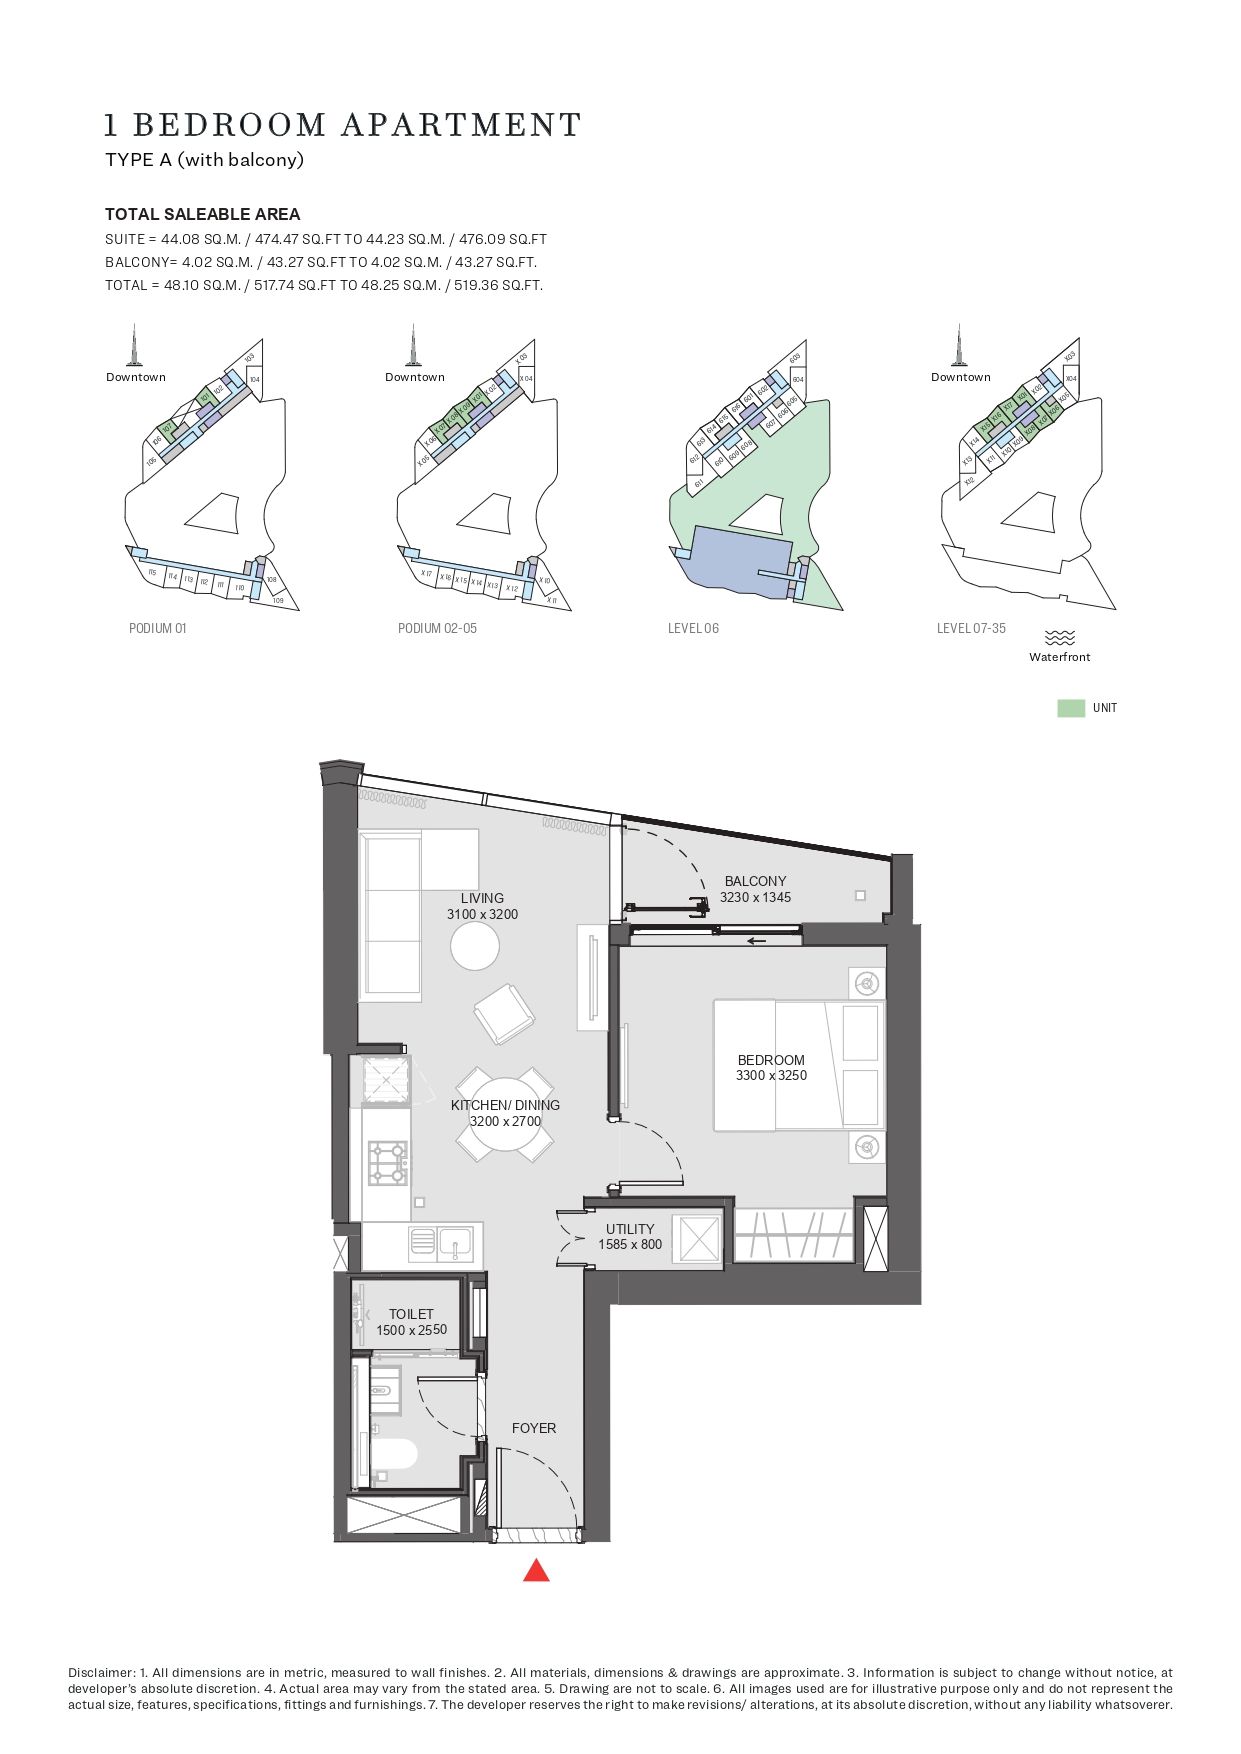 1 Bedroom Apartment Type A